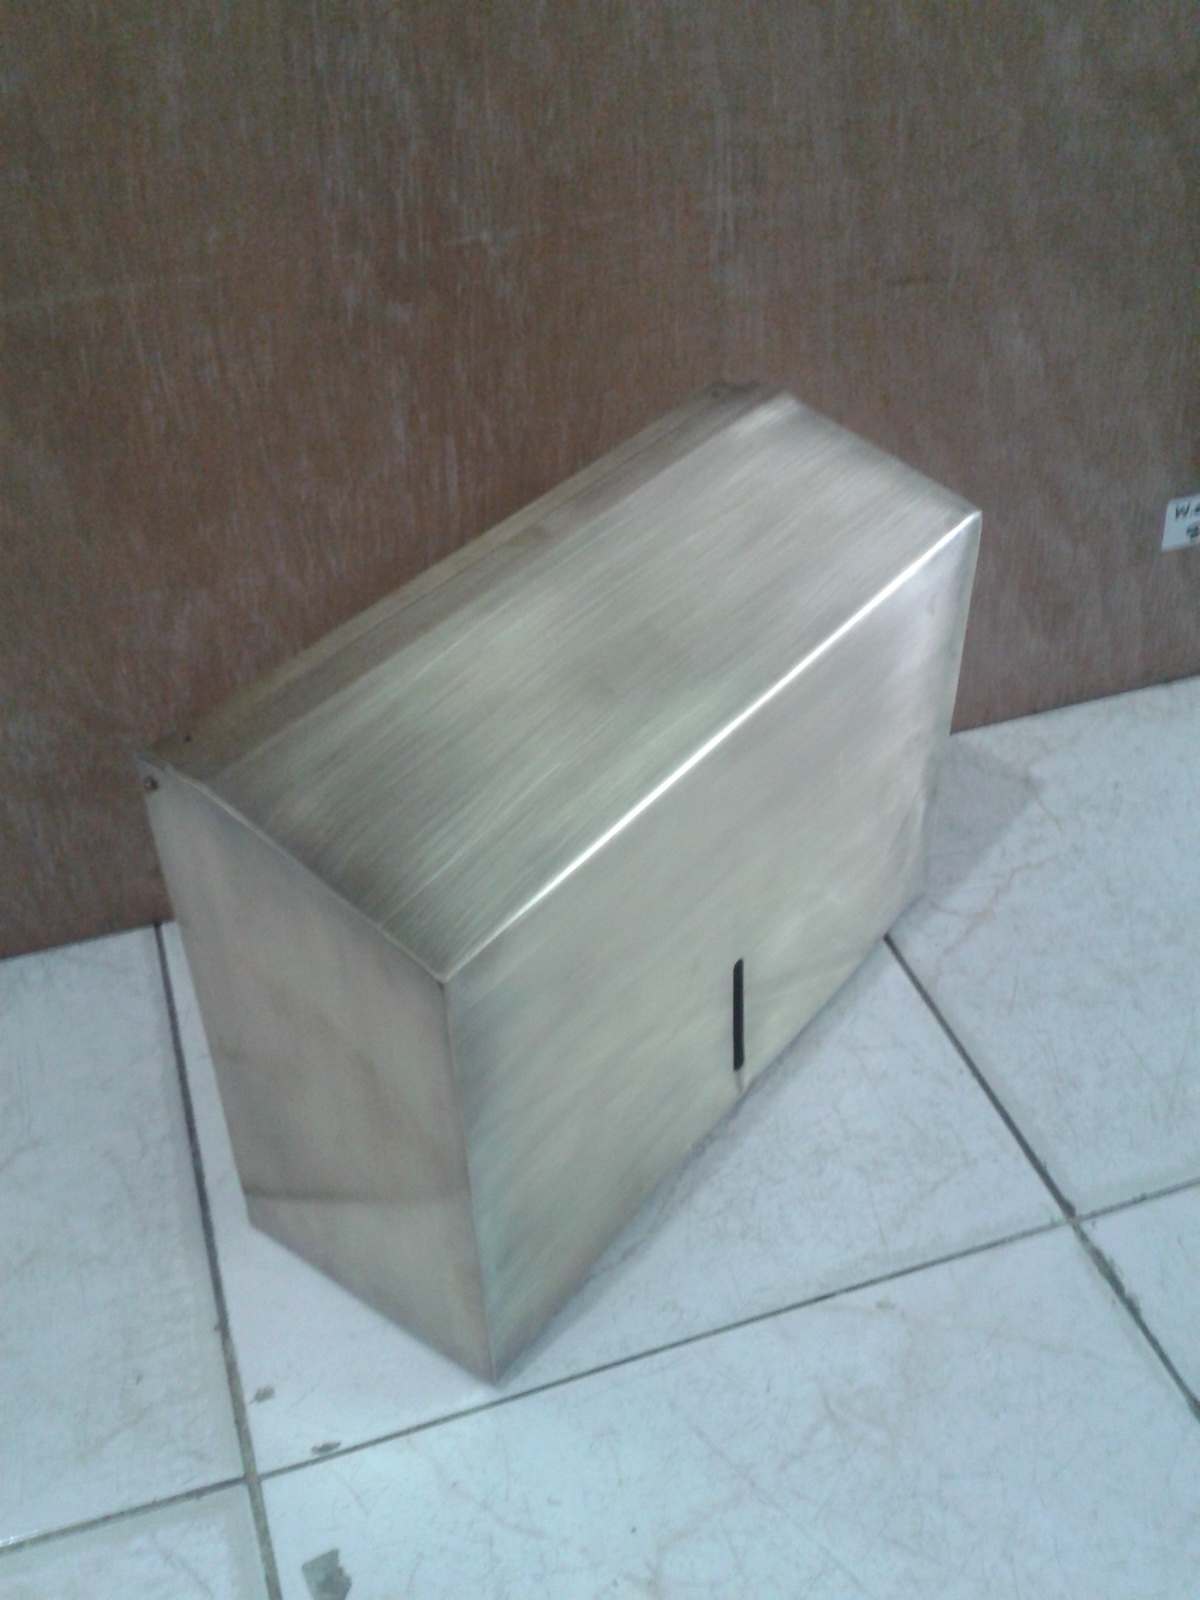 Mail box code MB002 size 297 x 117 x 217 mm. Thickness 1 mm.